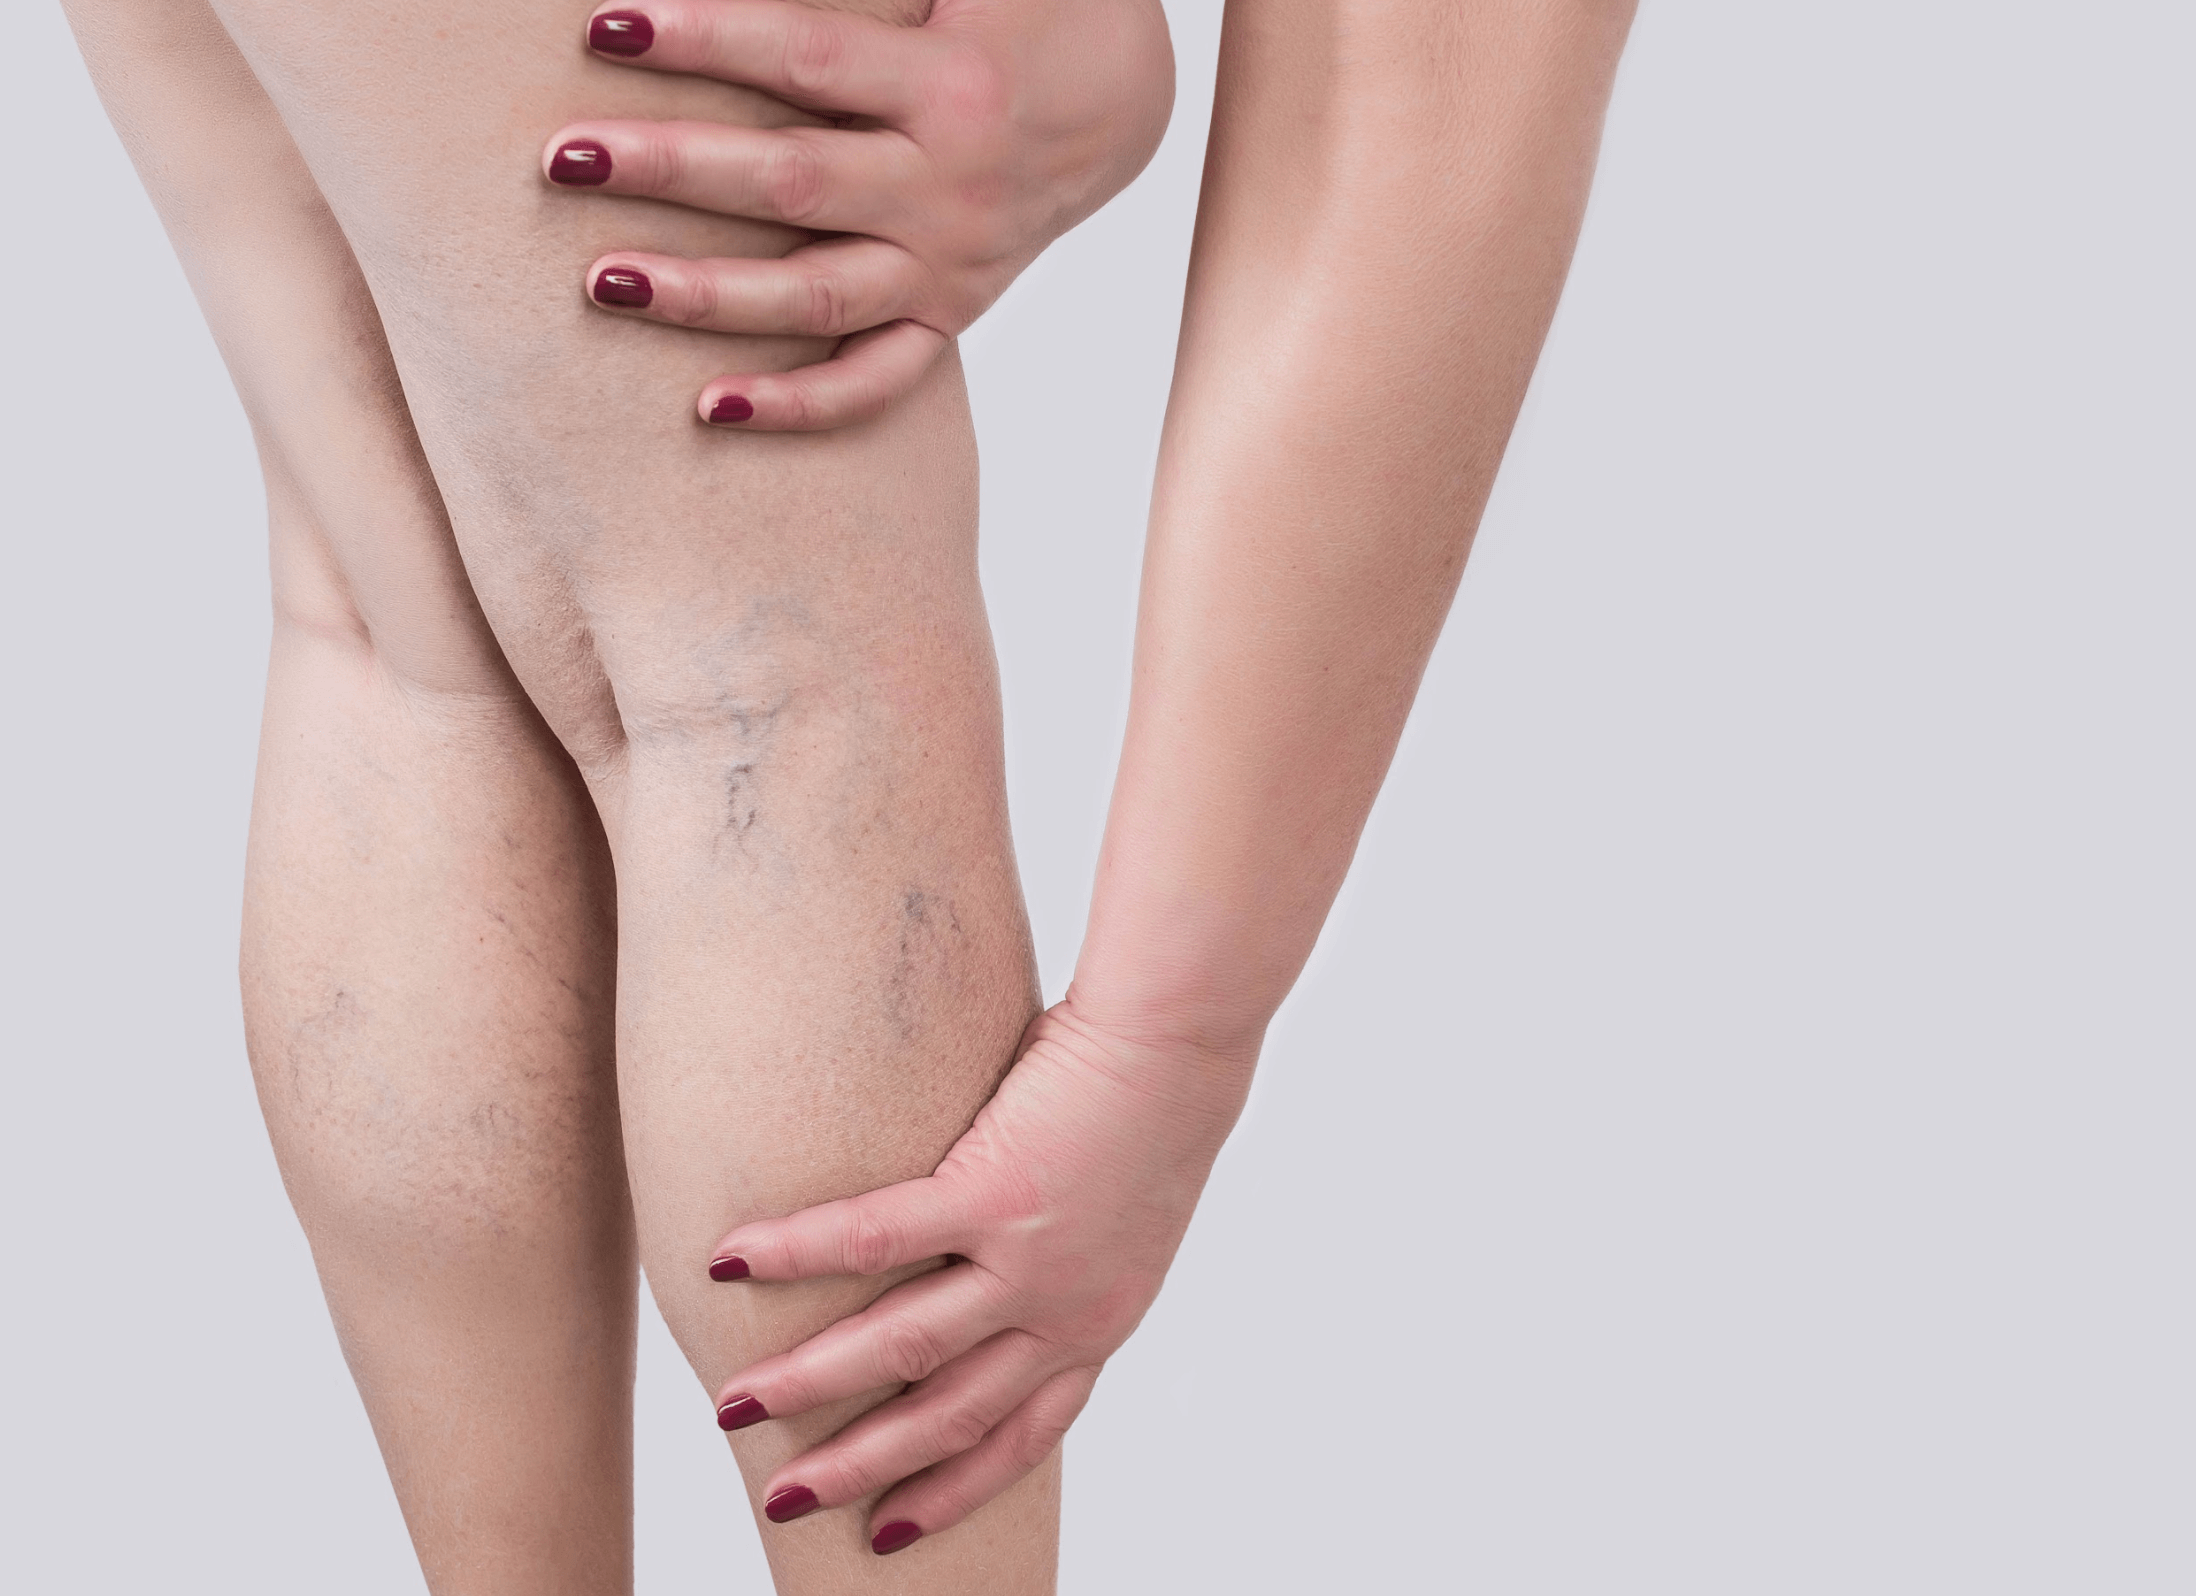 Spider Veins Vs Varicose Veins Treatment Whats the Difference  Blog   South Valley Vascular